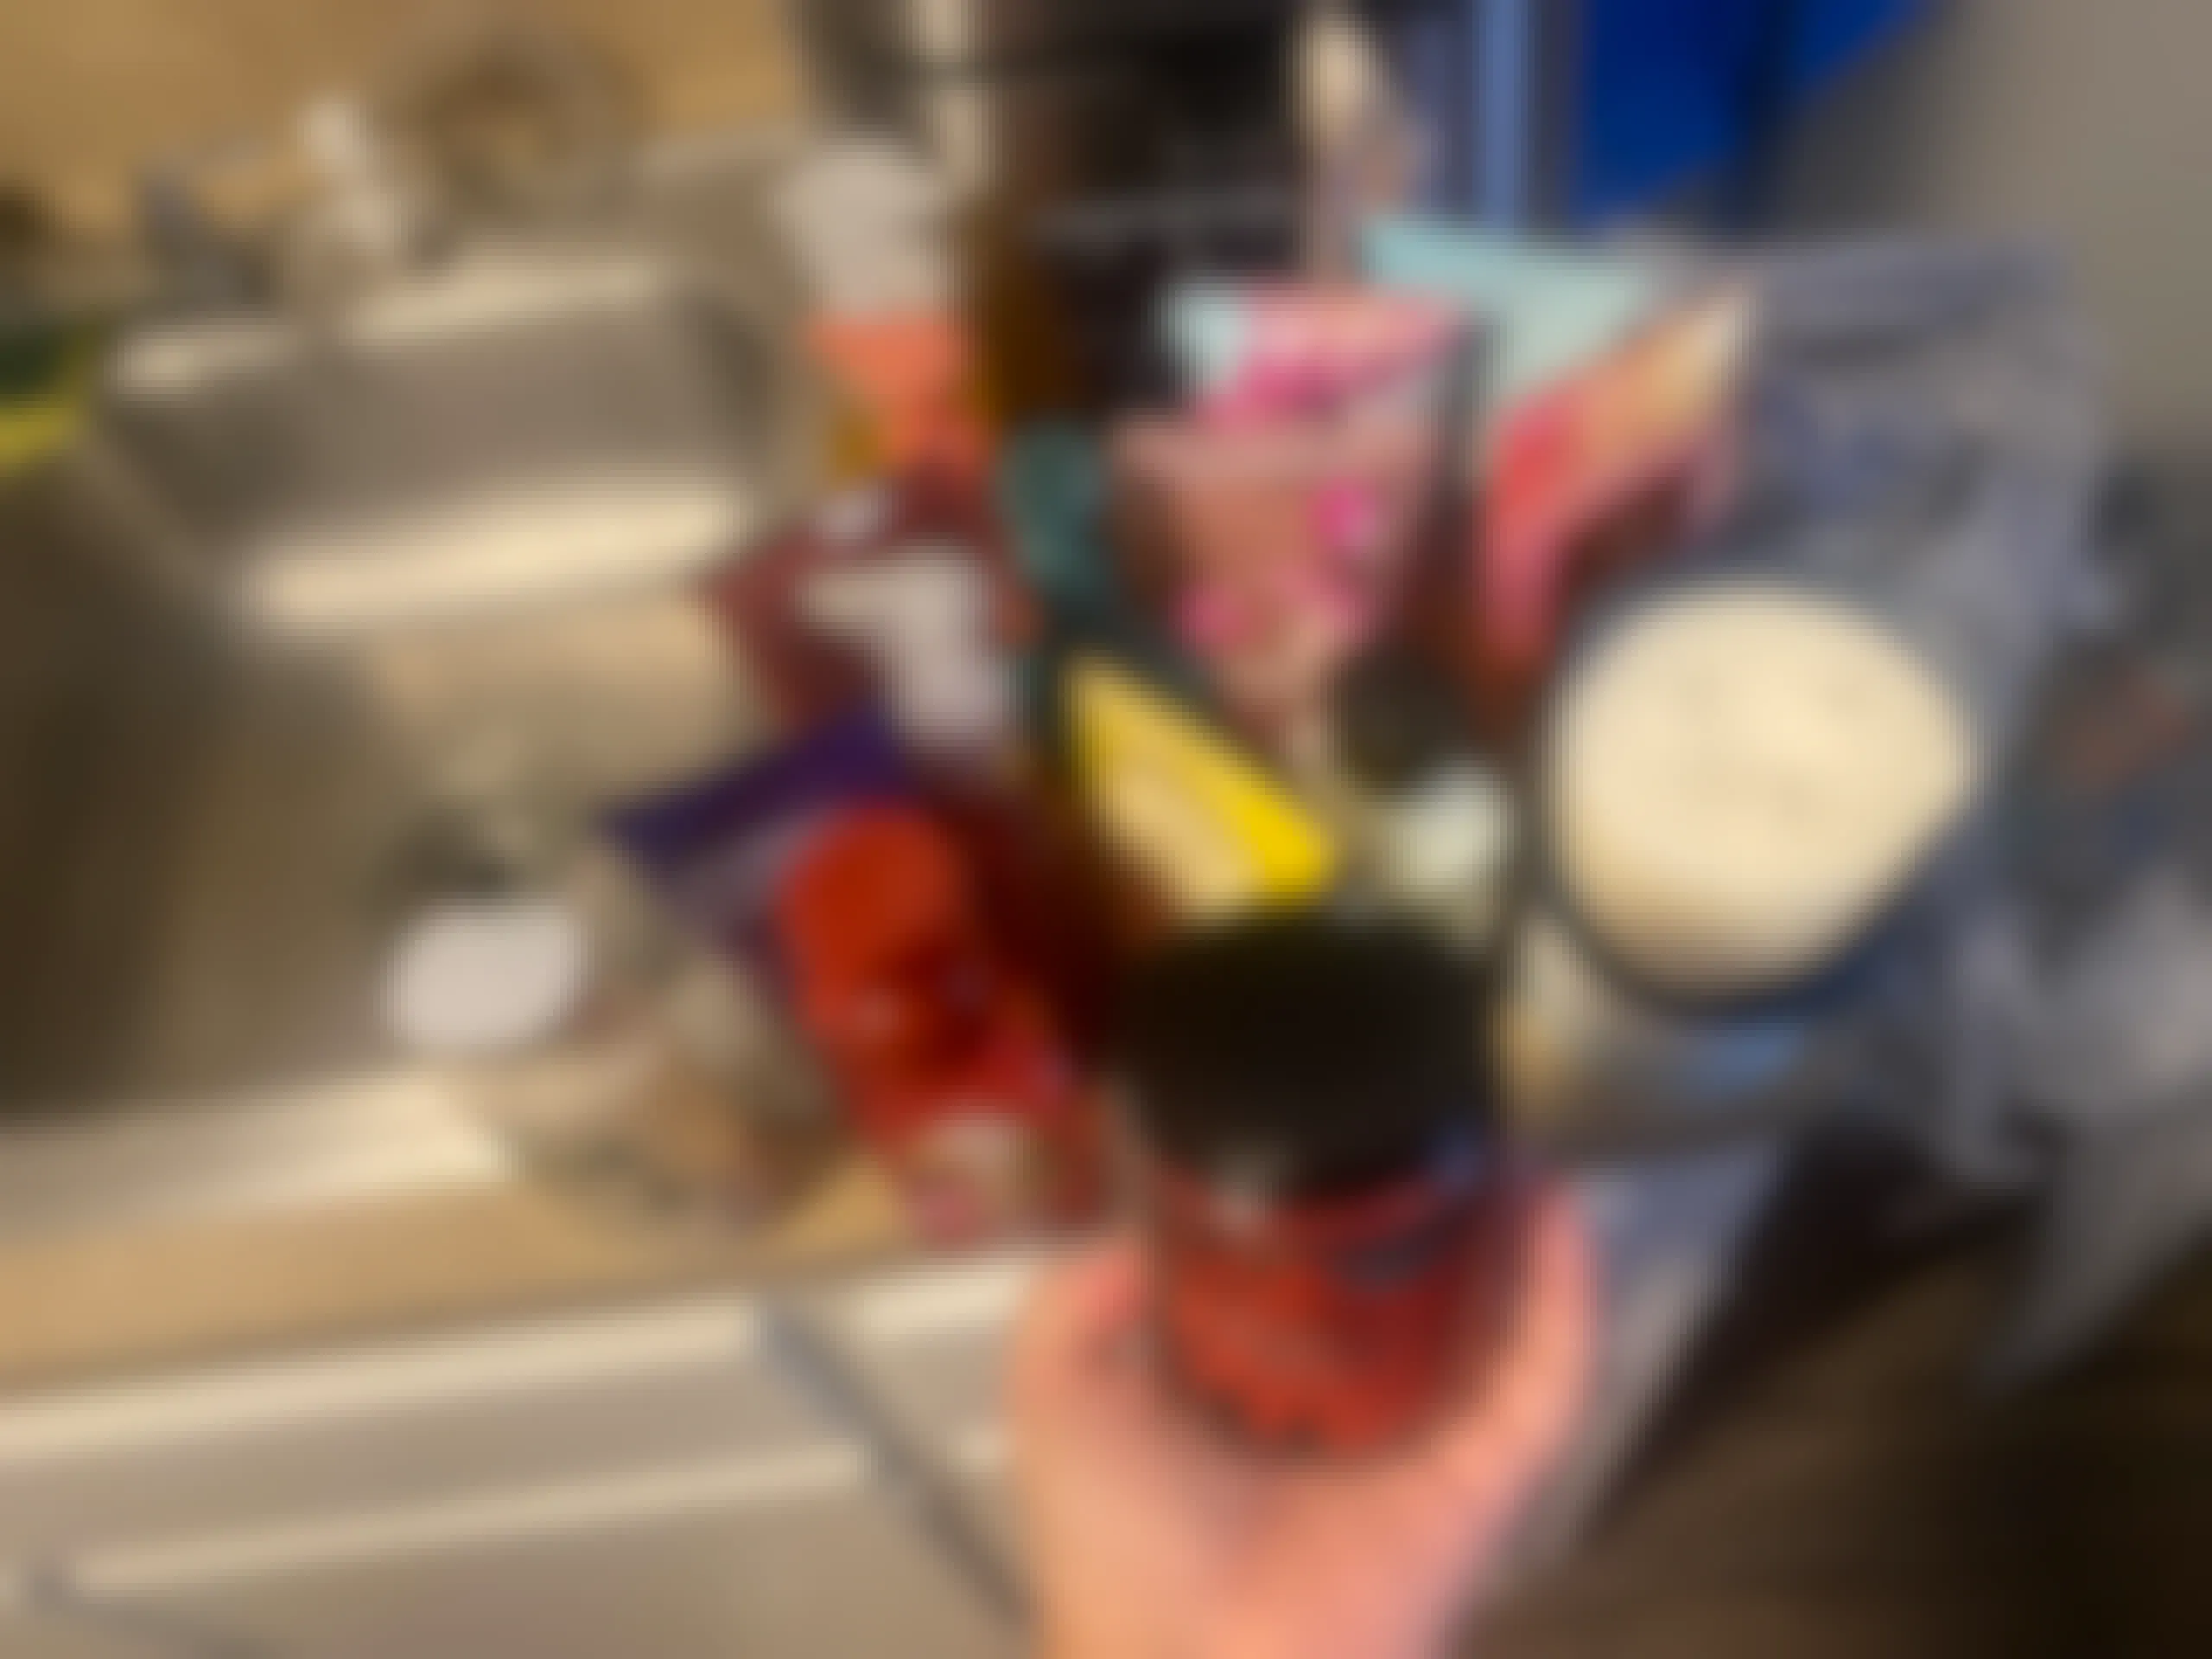 A collection of items retrieved from a Bath & Body Works dumpster